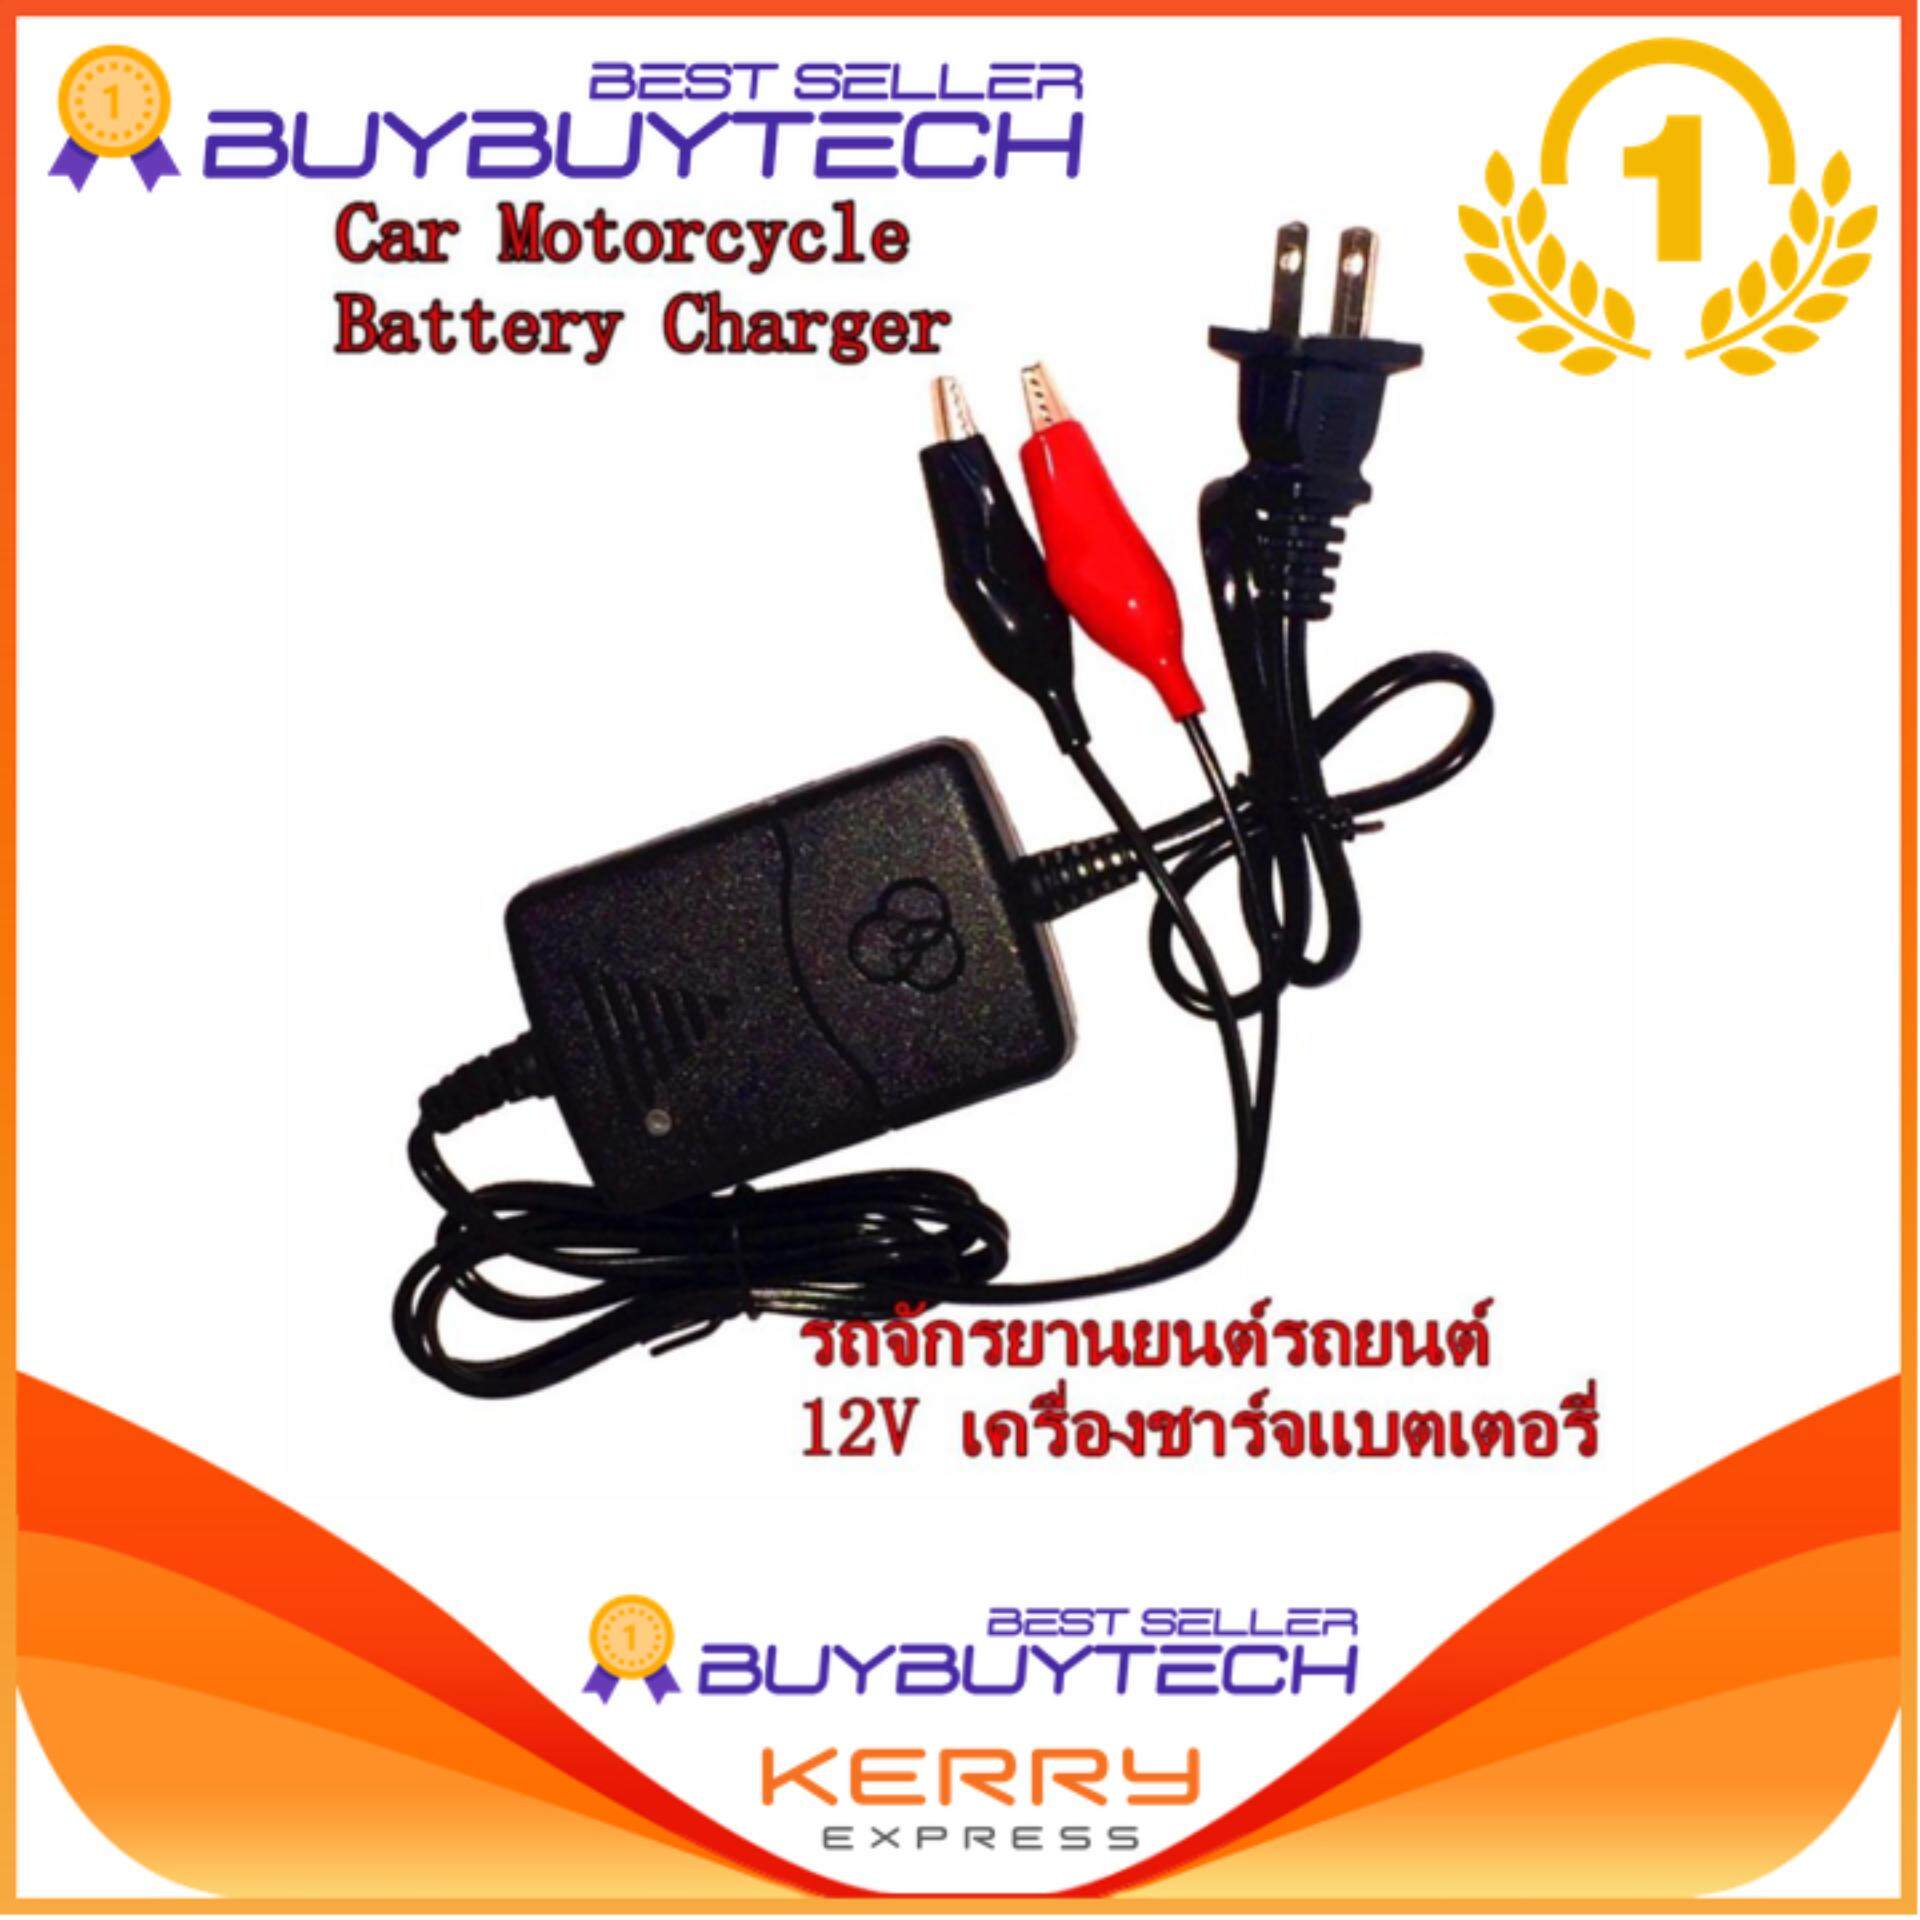 Buyuytech เครื่องชาร์จแบตเตอรี่ 12V Sealed Lead Acid Car Motorcycle Battery Charger Rechargeable Maintainer(1ชิ้น)